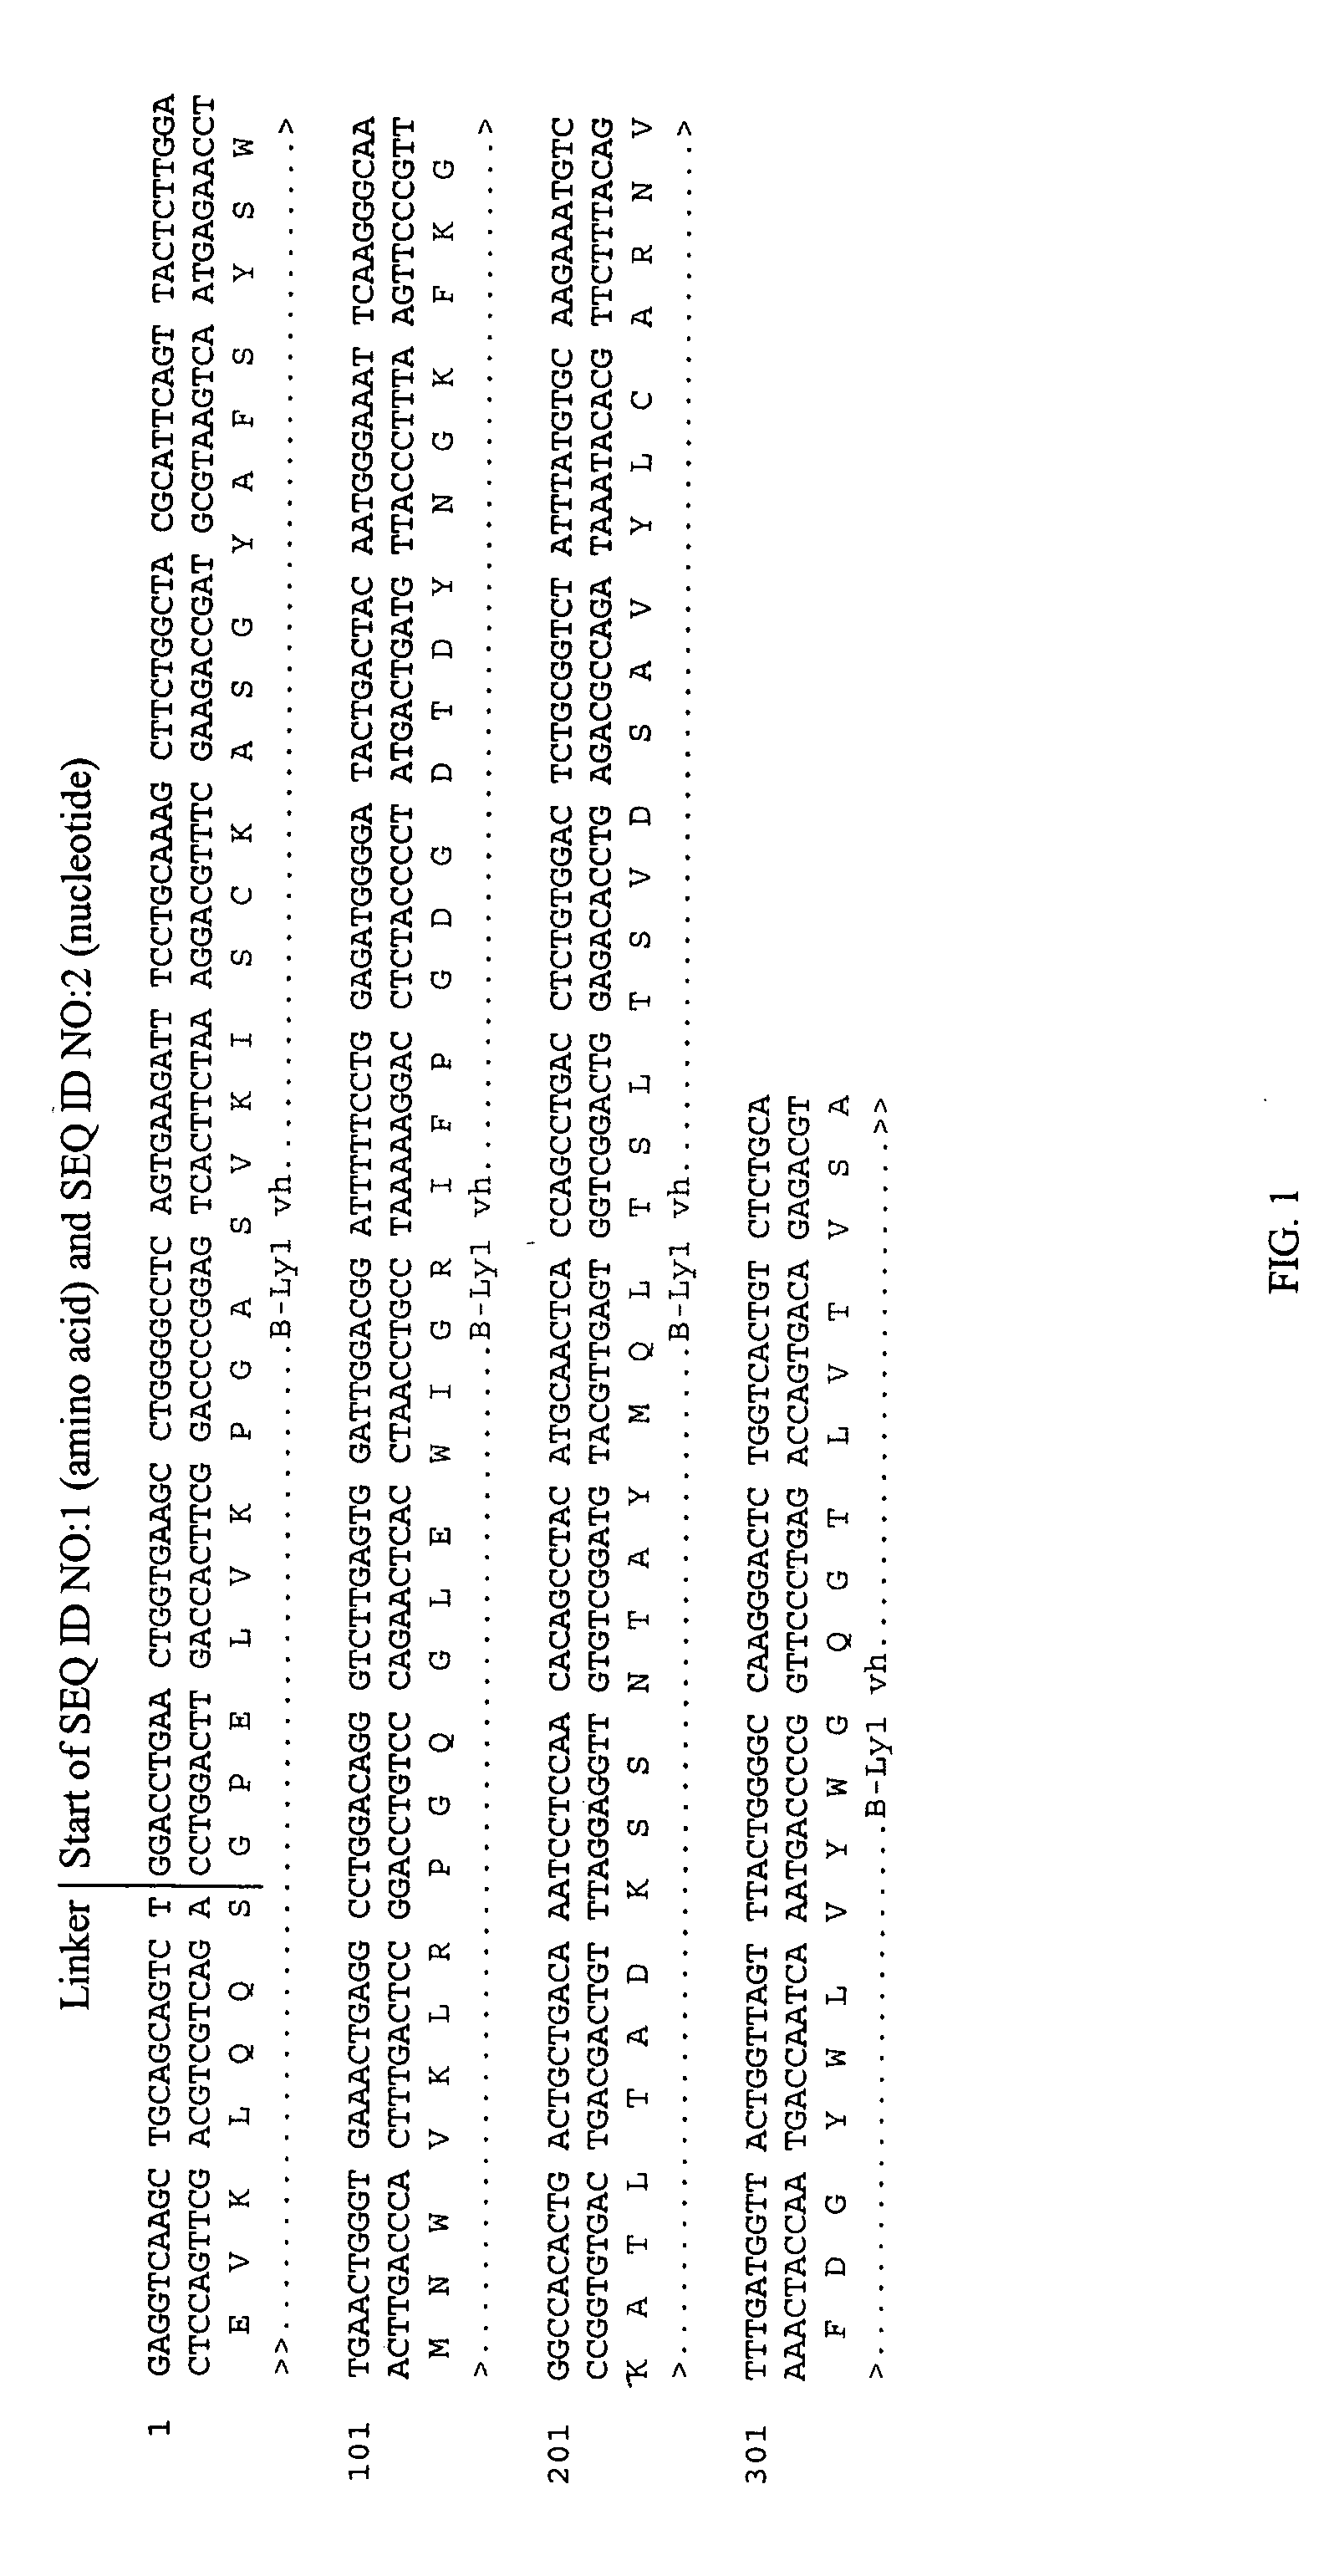 Antigen binding molecules with increased Fc receptor binding affinity and effector function